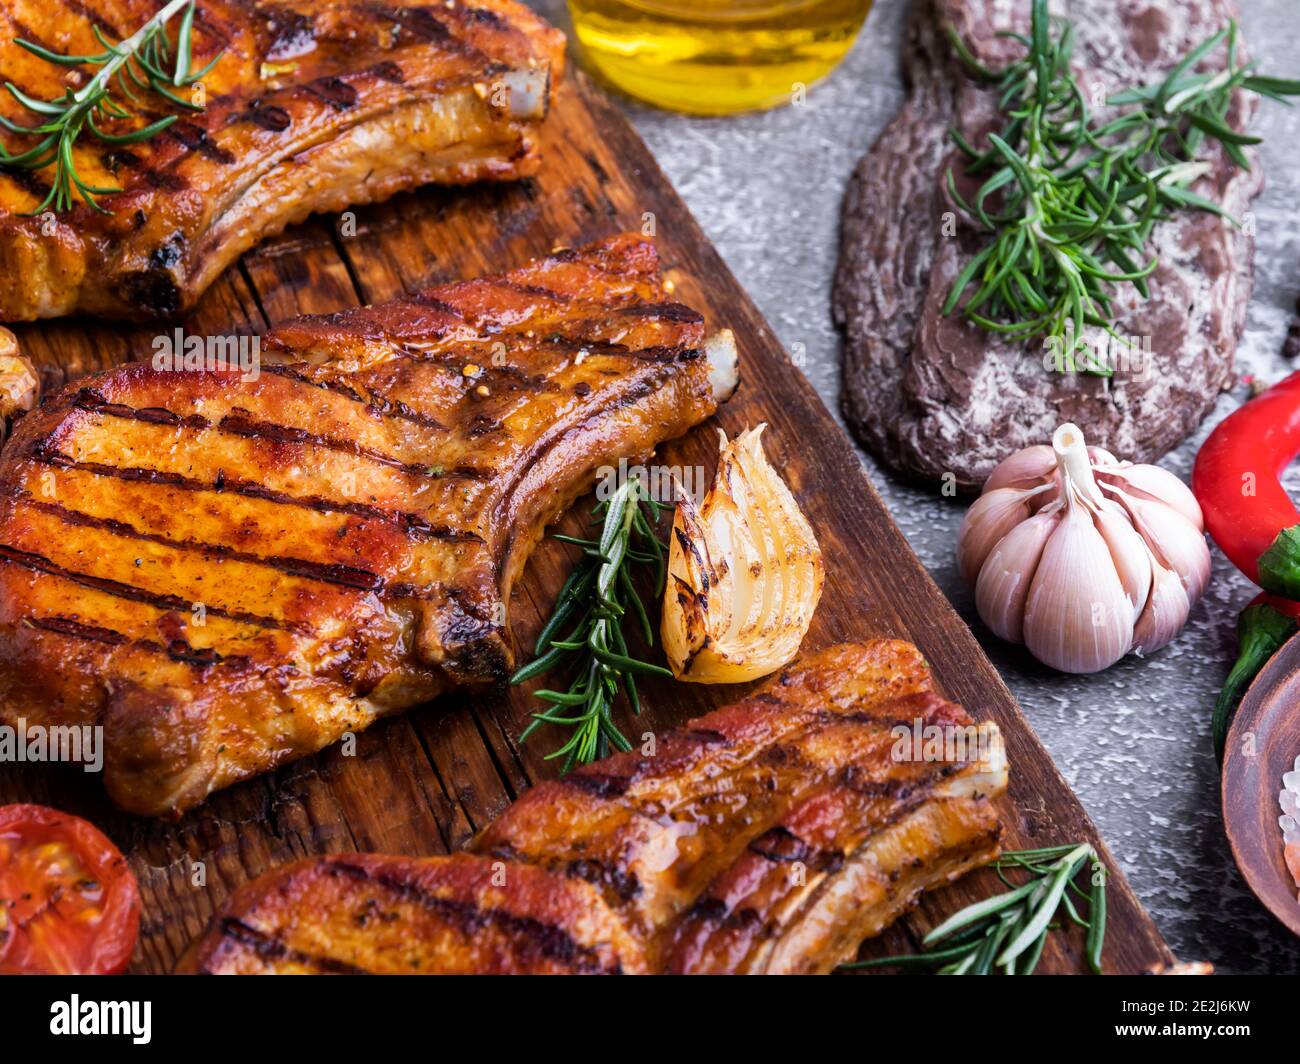 cooked grilled meat pork, beef, lamb, chop bone, cutting board, spices, tomato, Stock Photo